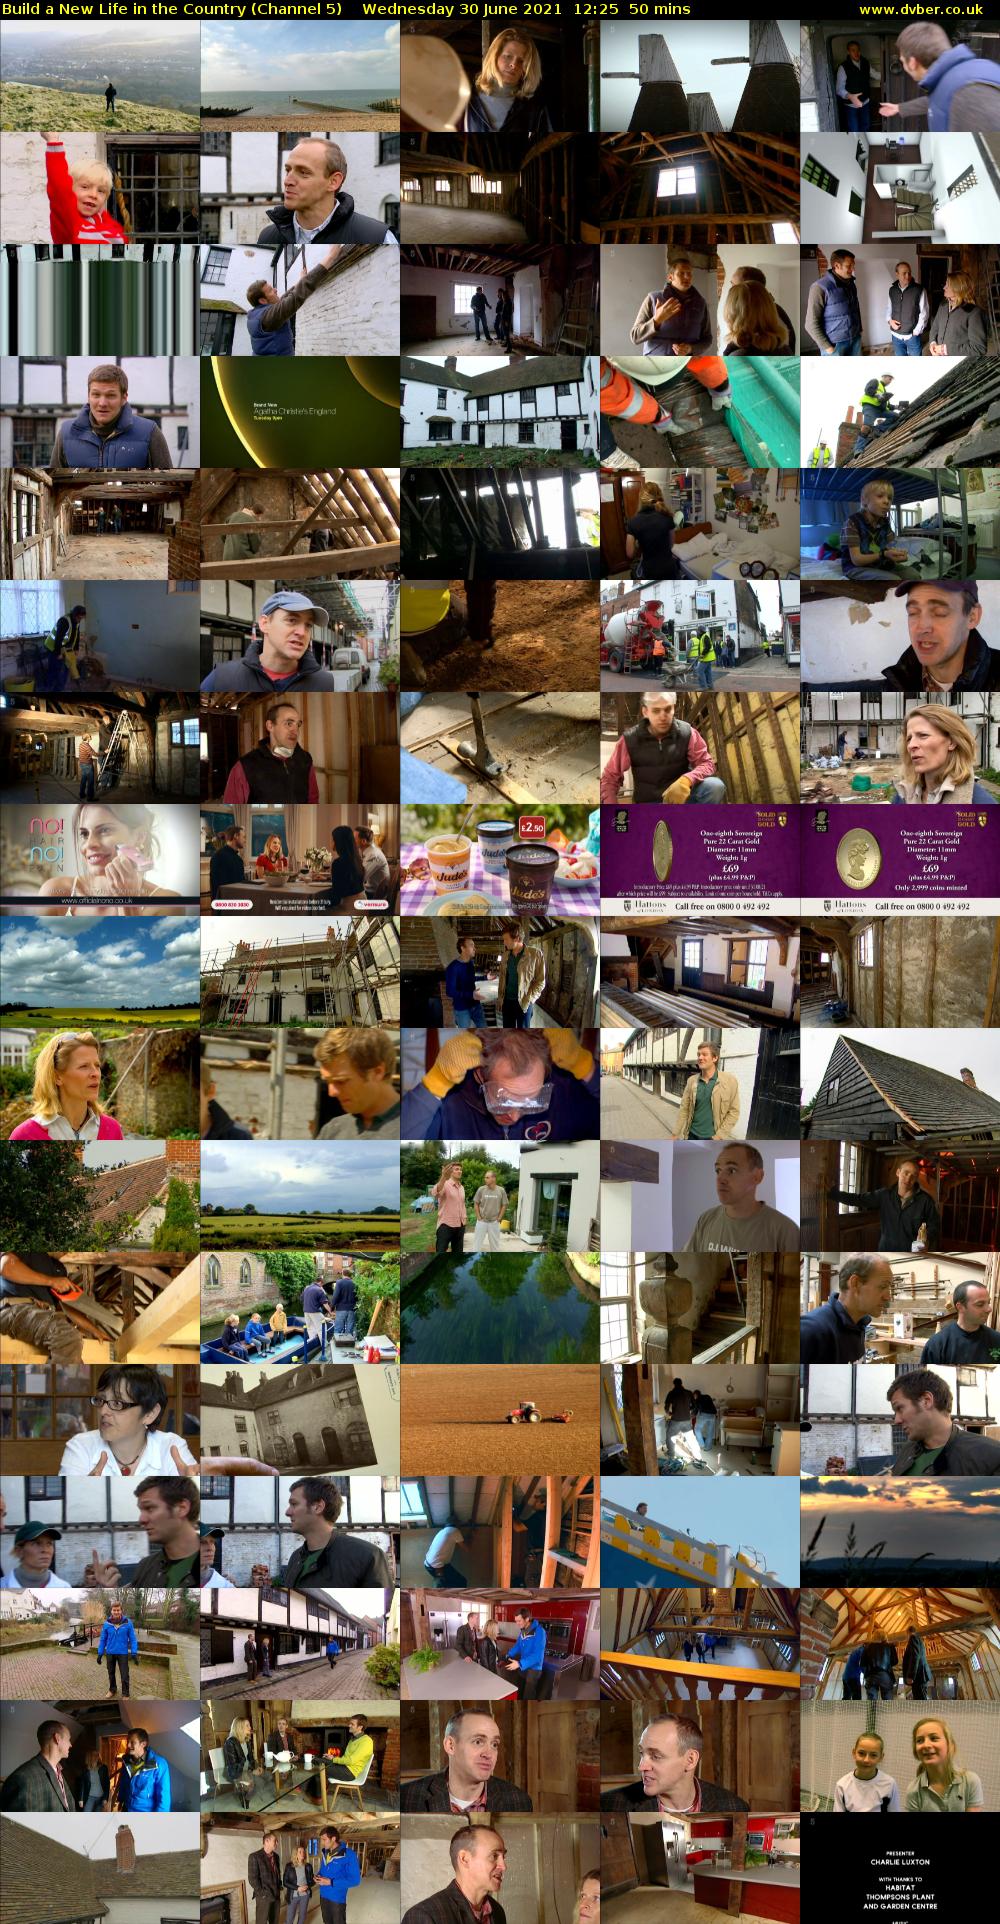 Build a New Life in the Country (Channel 5) Wednesday 30 June 2021 12:25 - 13:15